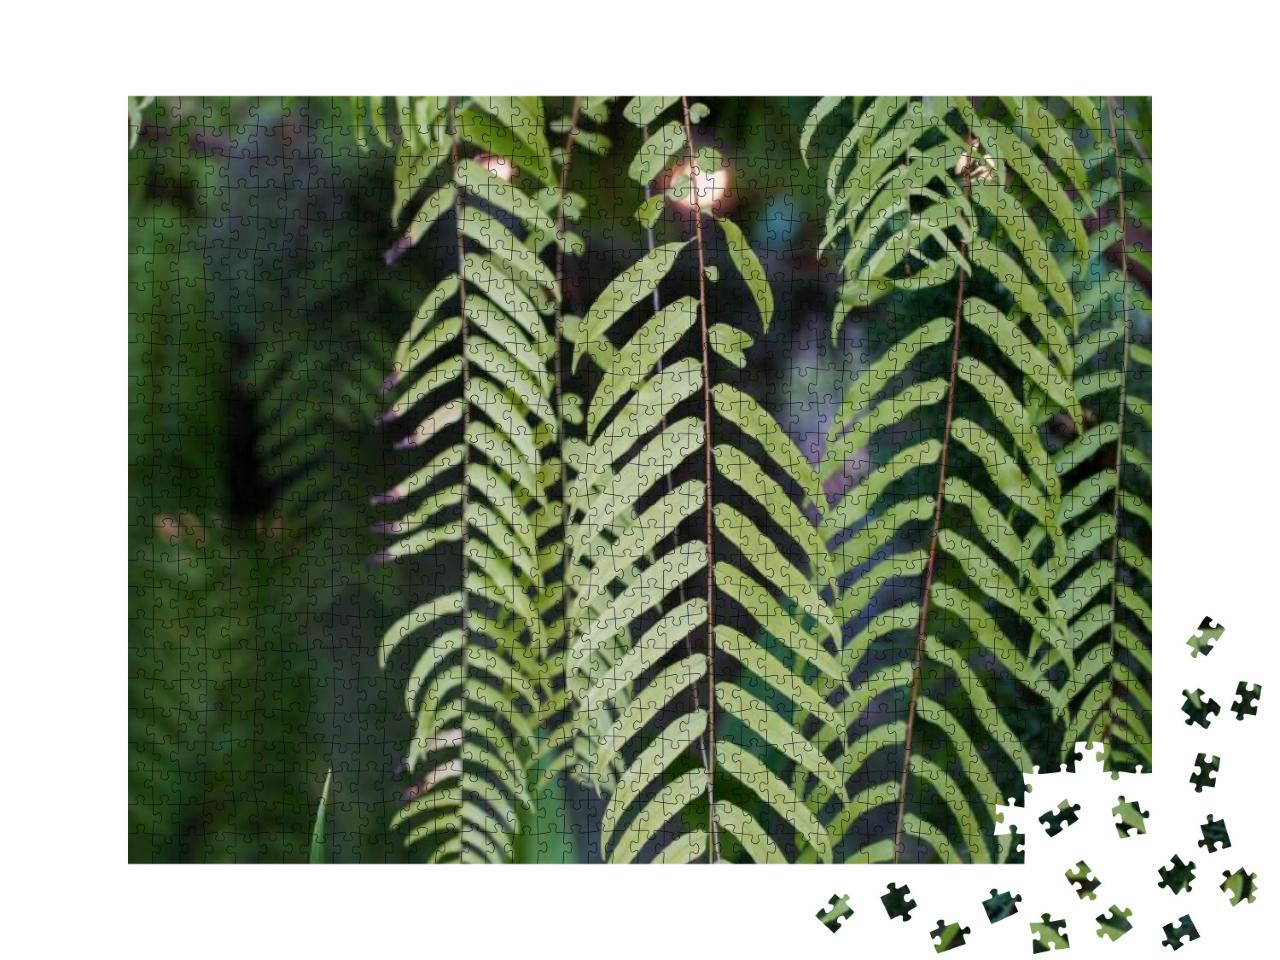 Giant Sword Fern Plant Hanging... Jigsaw Puzzle with 1000 pieces